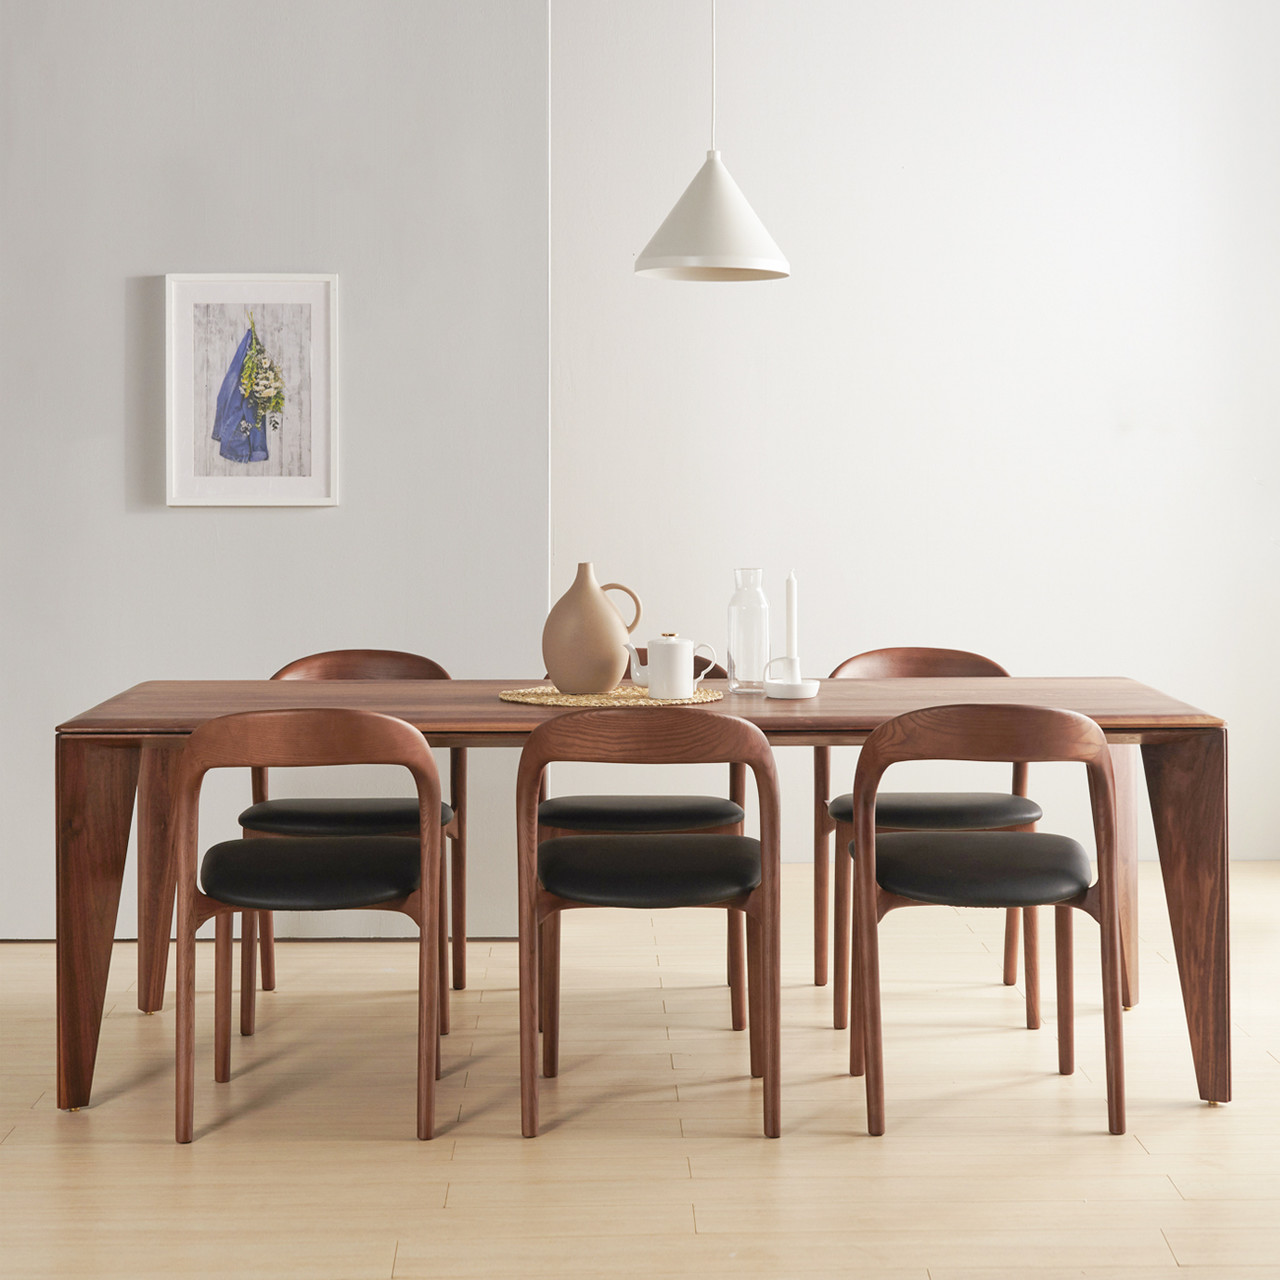 <p style="text-align:left; font-size:16px; margin-top:26px;">Judd Table [Walnut]<br><span style="color:#666;">₩ 2,160,000~</span></p>